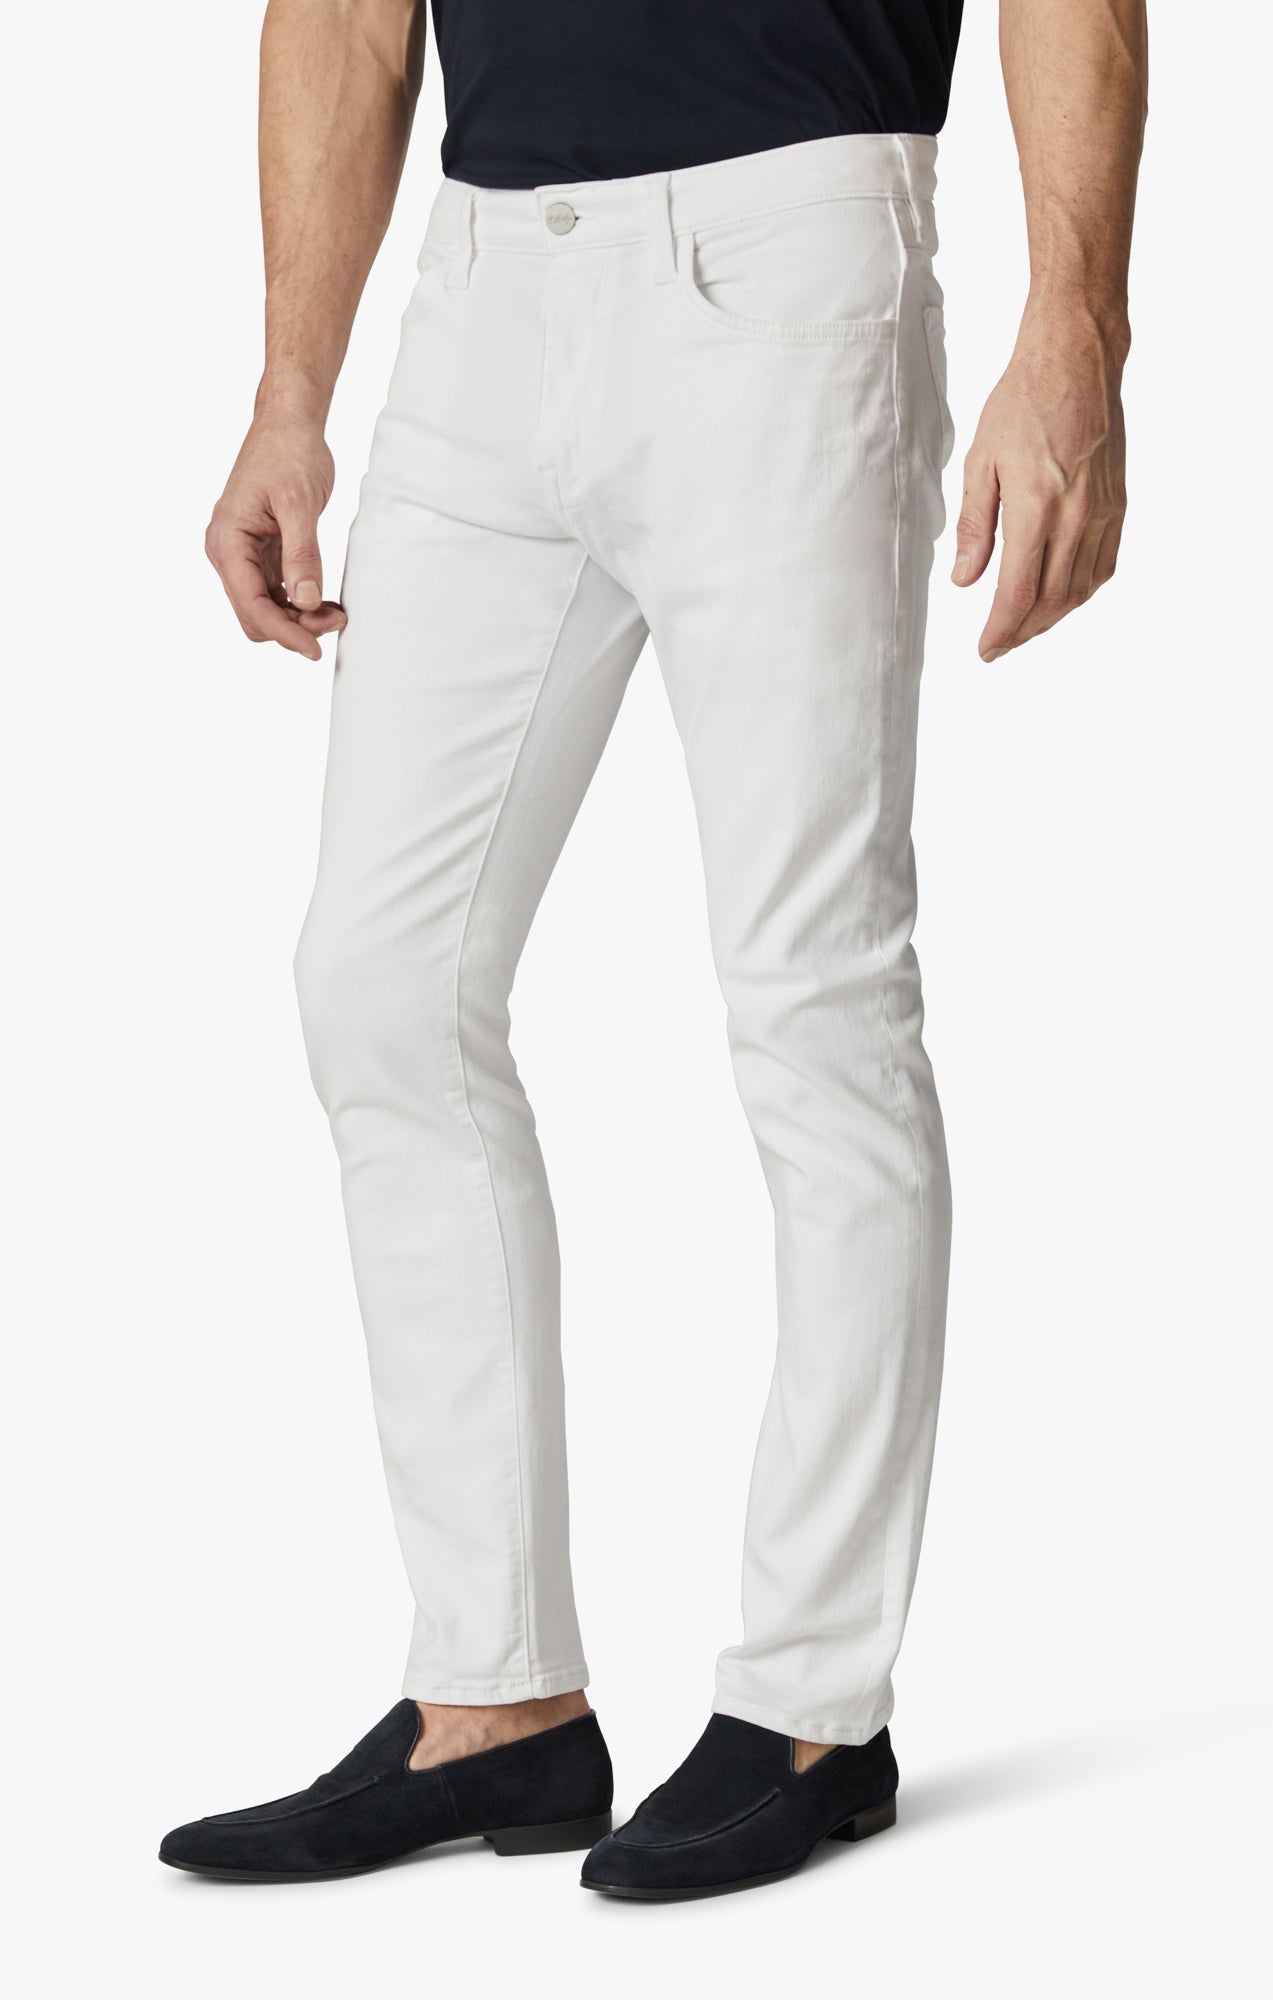 Cool Slim Leg Pants In Double White Comfort Image 5